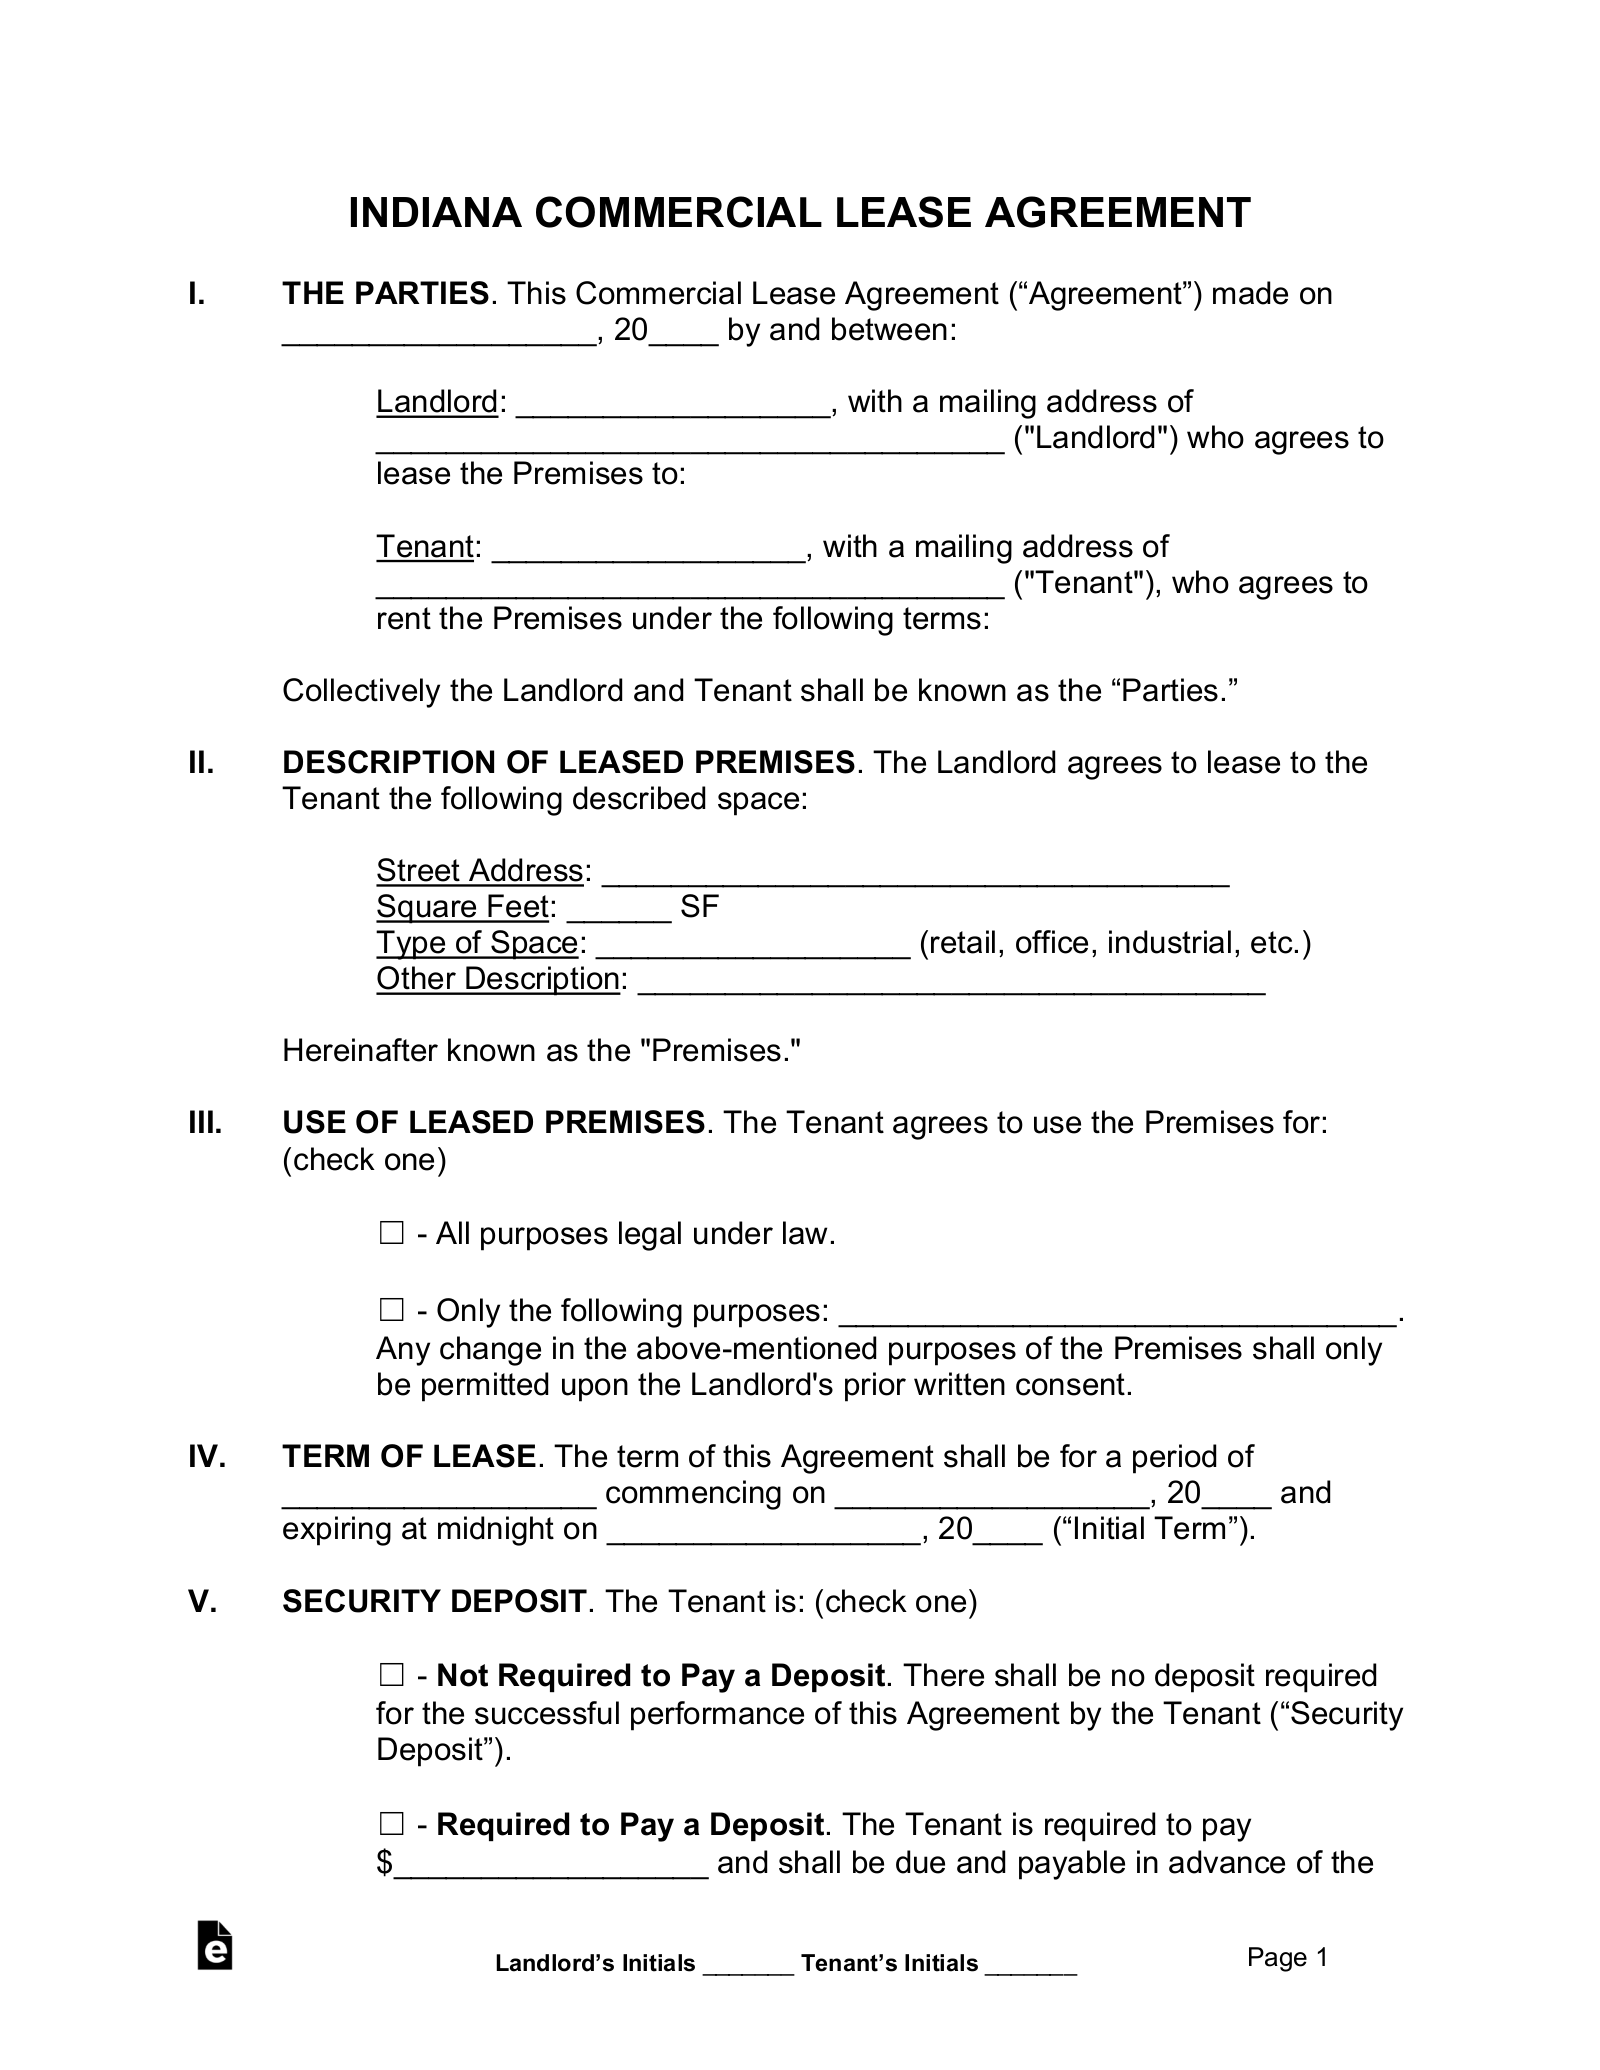 Indiana Commercial Lease Agreement Template